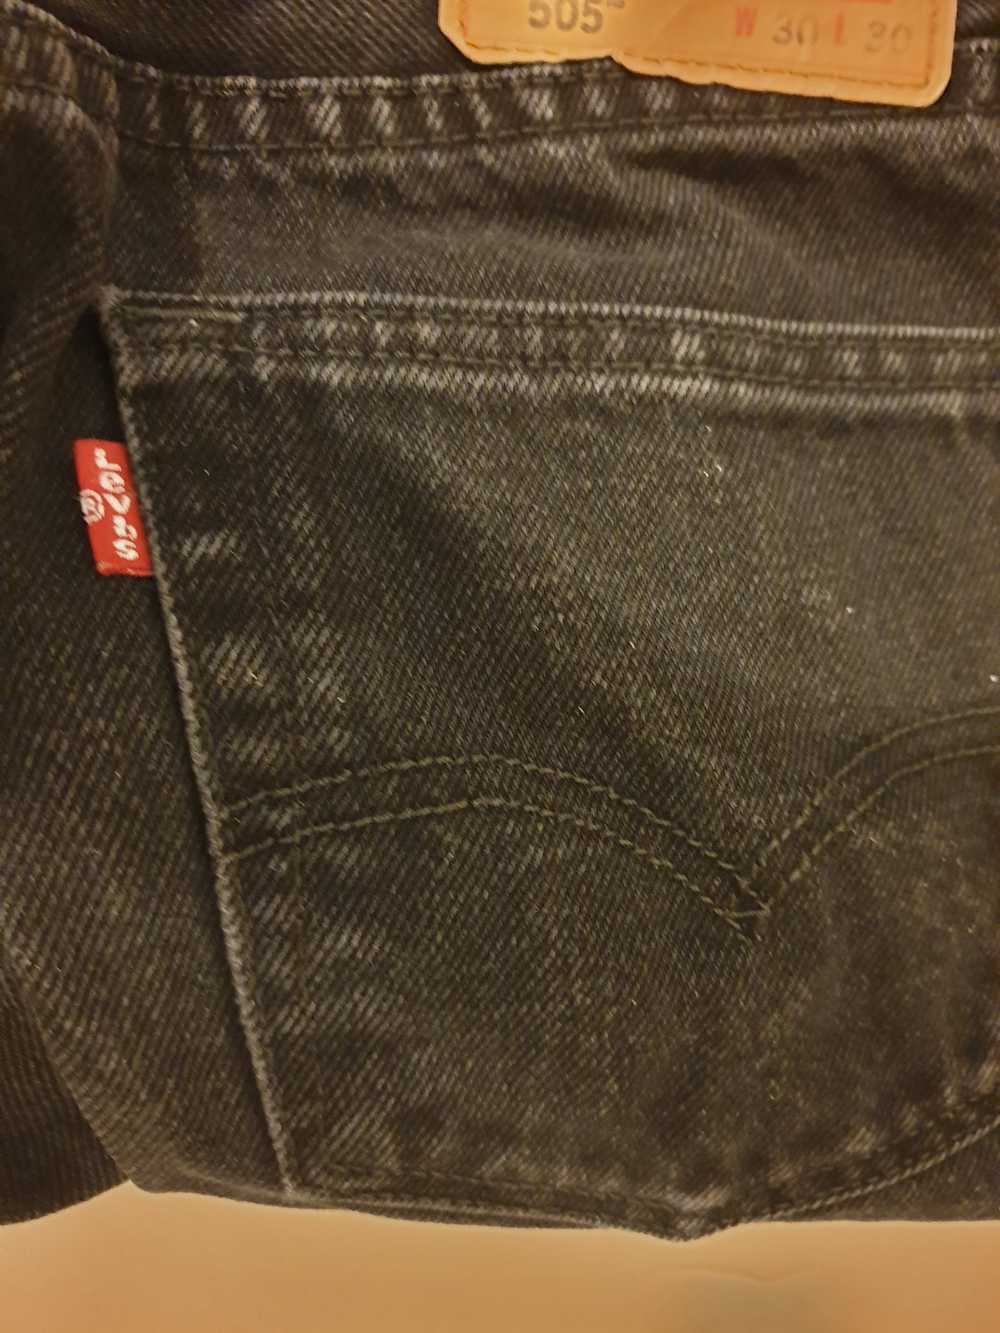 Levi's 505 - classic fit, faded black - image 6